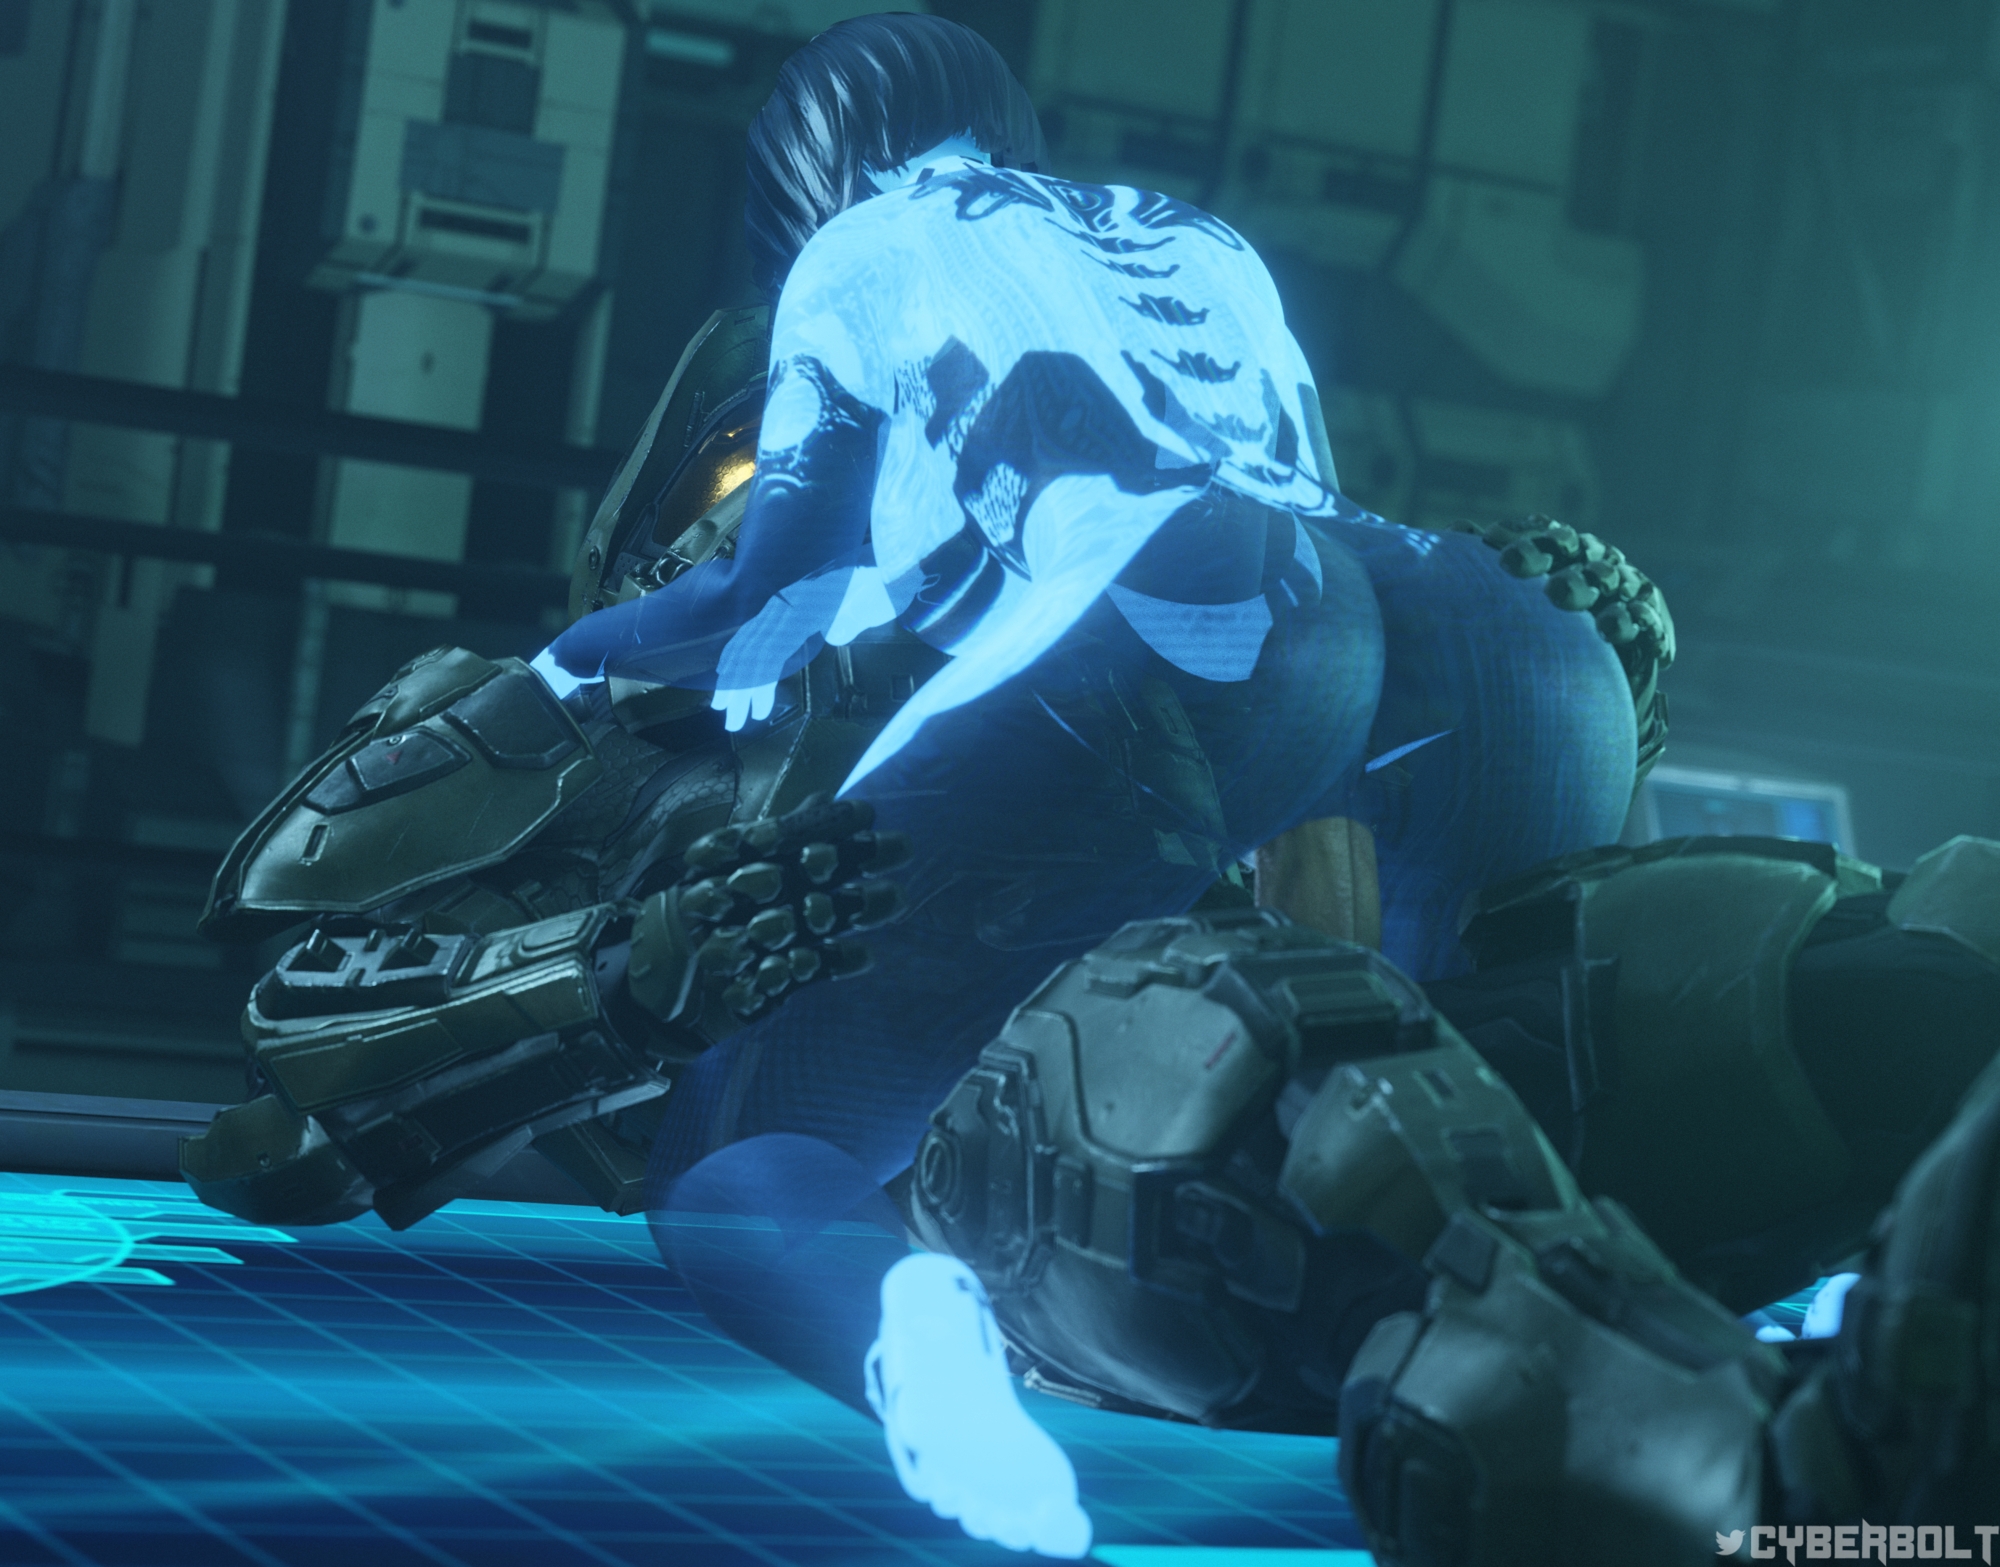 Halo 4 Master Chief and Cortana Alone Time Halo Halo 4 Master Chief Cortana 1boy1girl Blowjob Missionary Big Tits Big Breasts Big Ass Thicc Thighs Thick 6